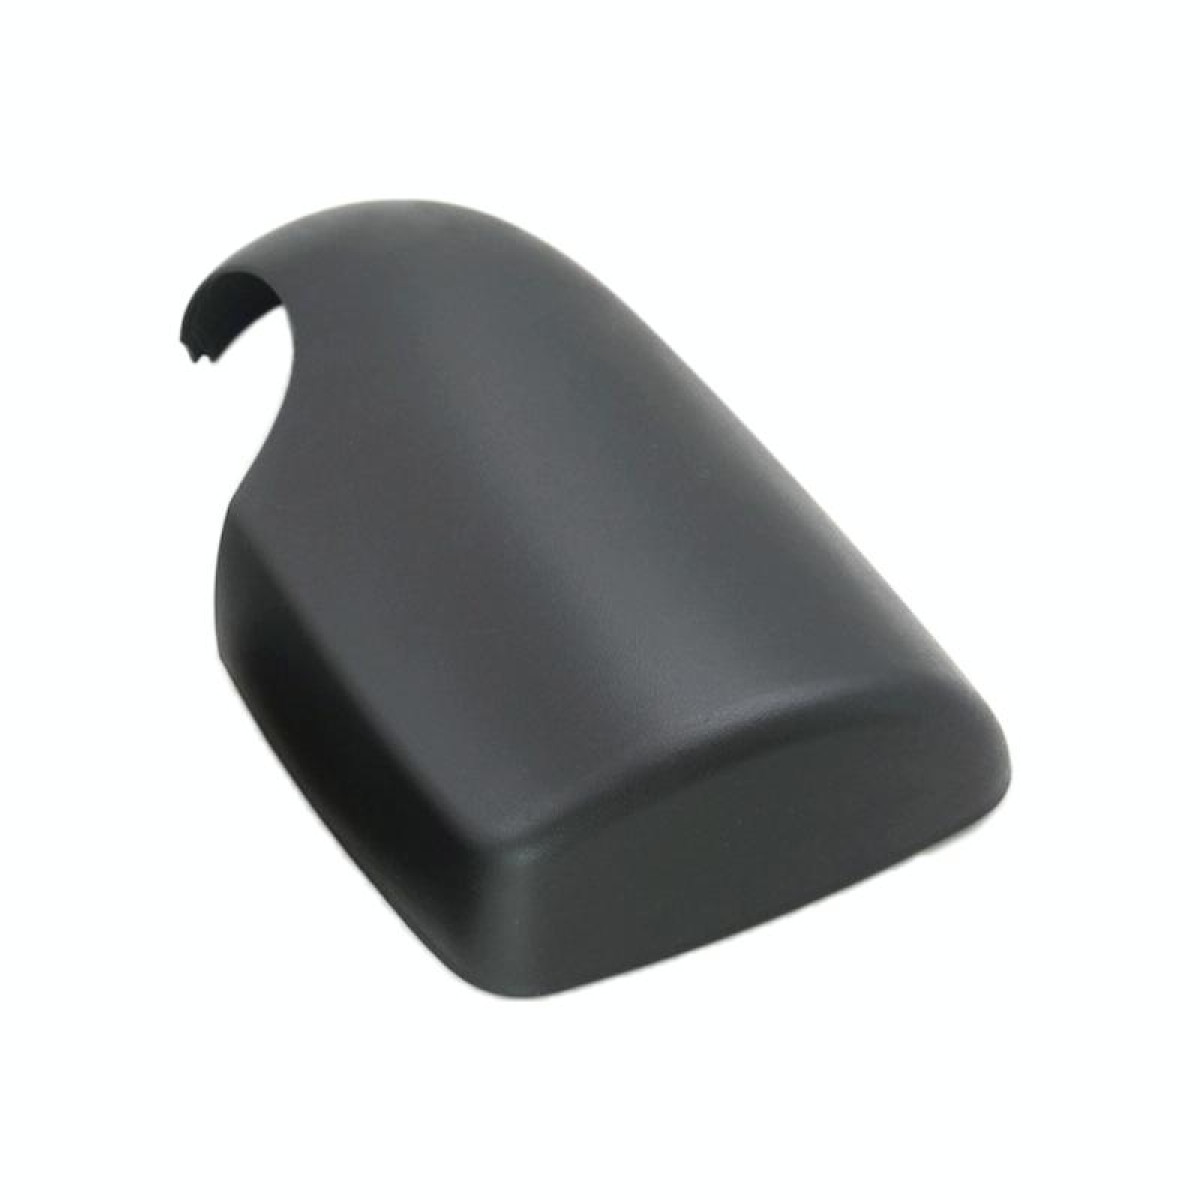 For Ford Transit MK6 MK7 2000-2014 Car Right Side Rearview Mirror Cap Cover